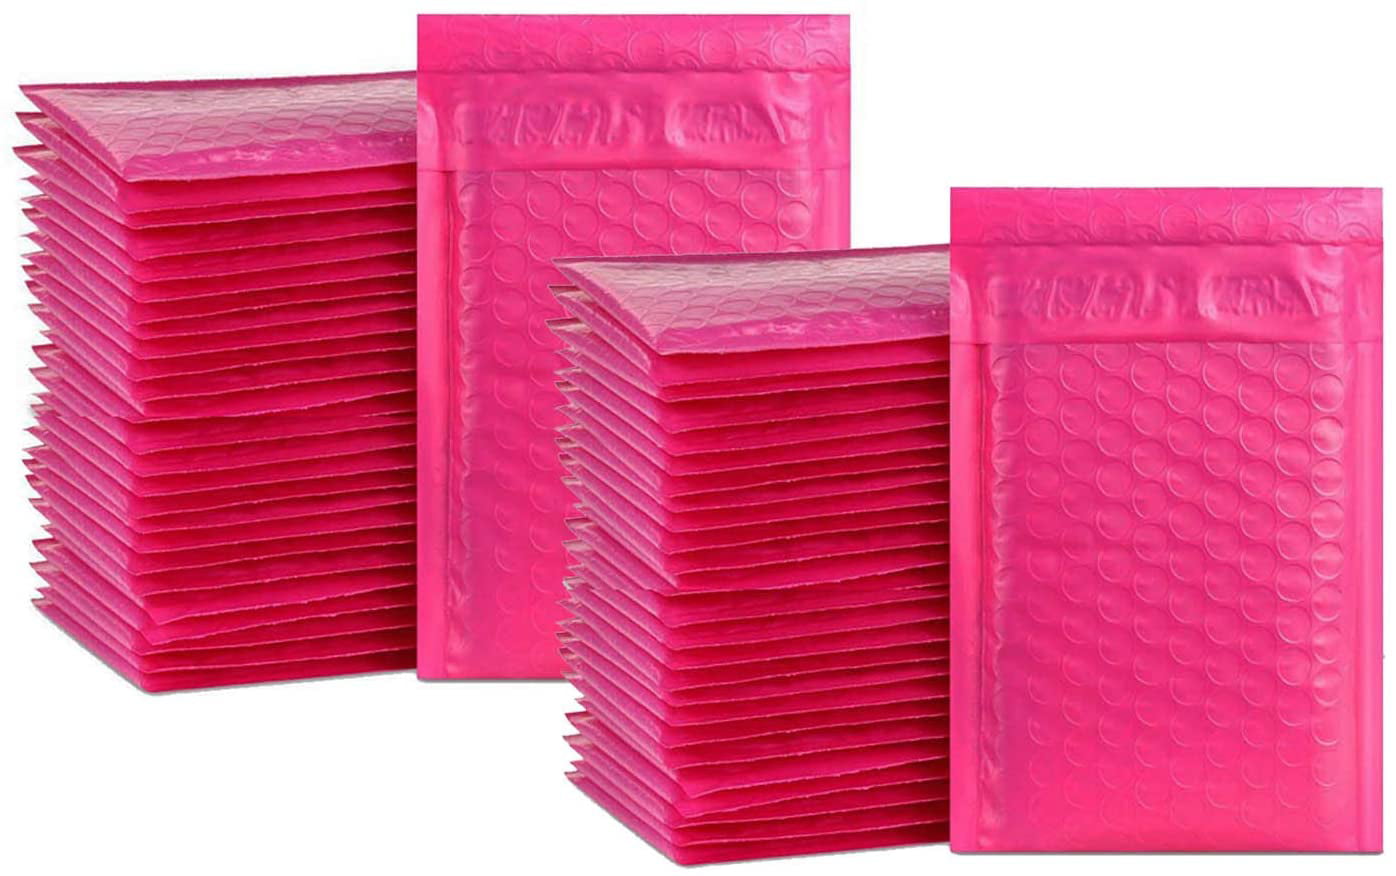 Details about   Poly Bubble Mailers Self Seal Hot Pink Padded Envelopes Adhesive 4x8 Inches 50pc 